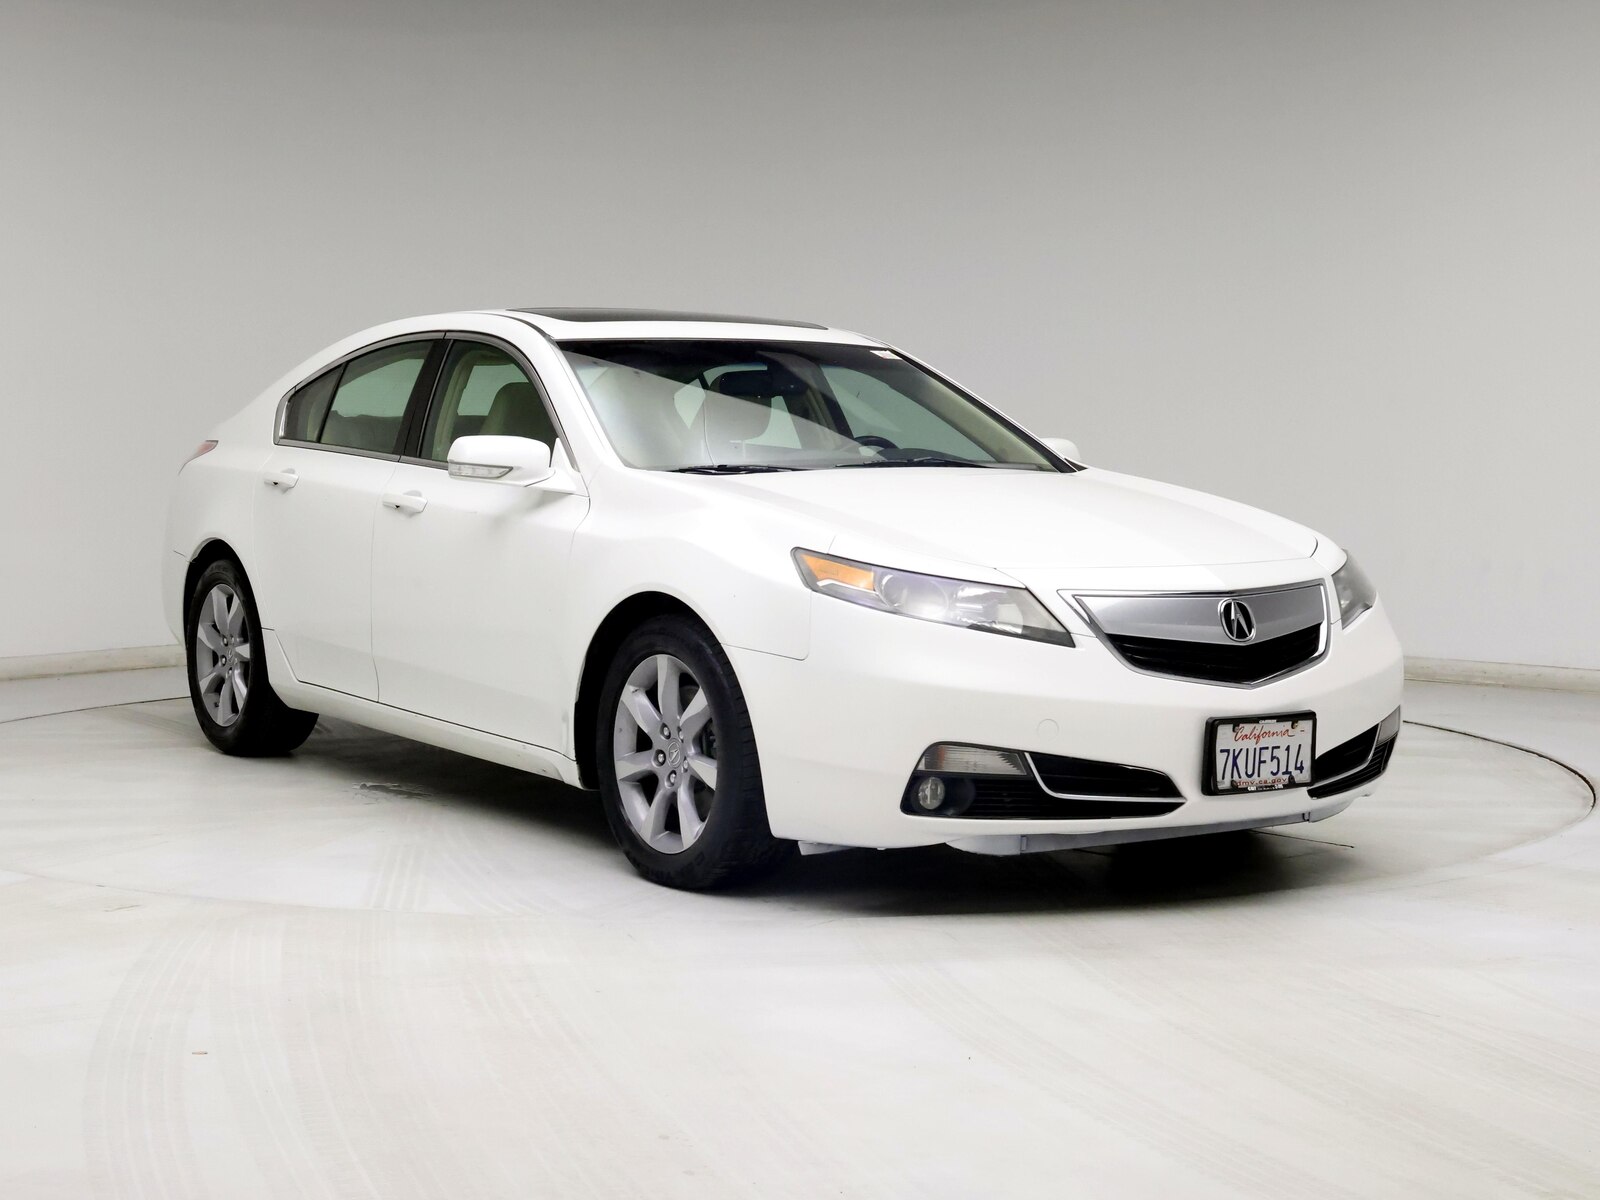 Used 2012 Acura TL  with VIN 19UUA8F23CA012276 for sale in Spokane Valley, WA